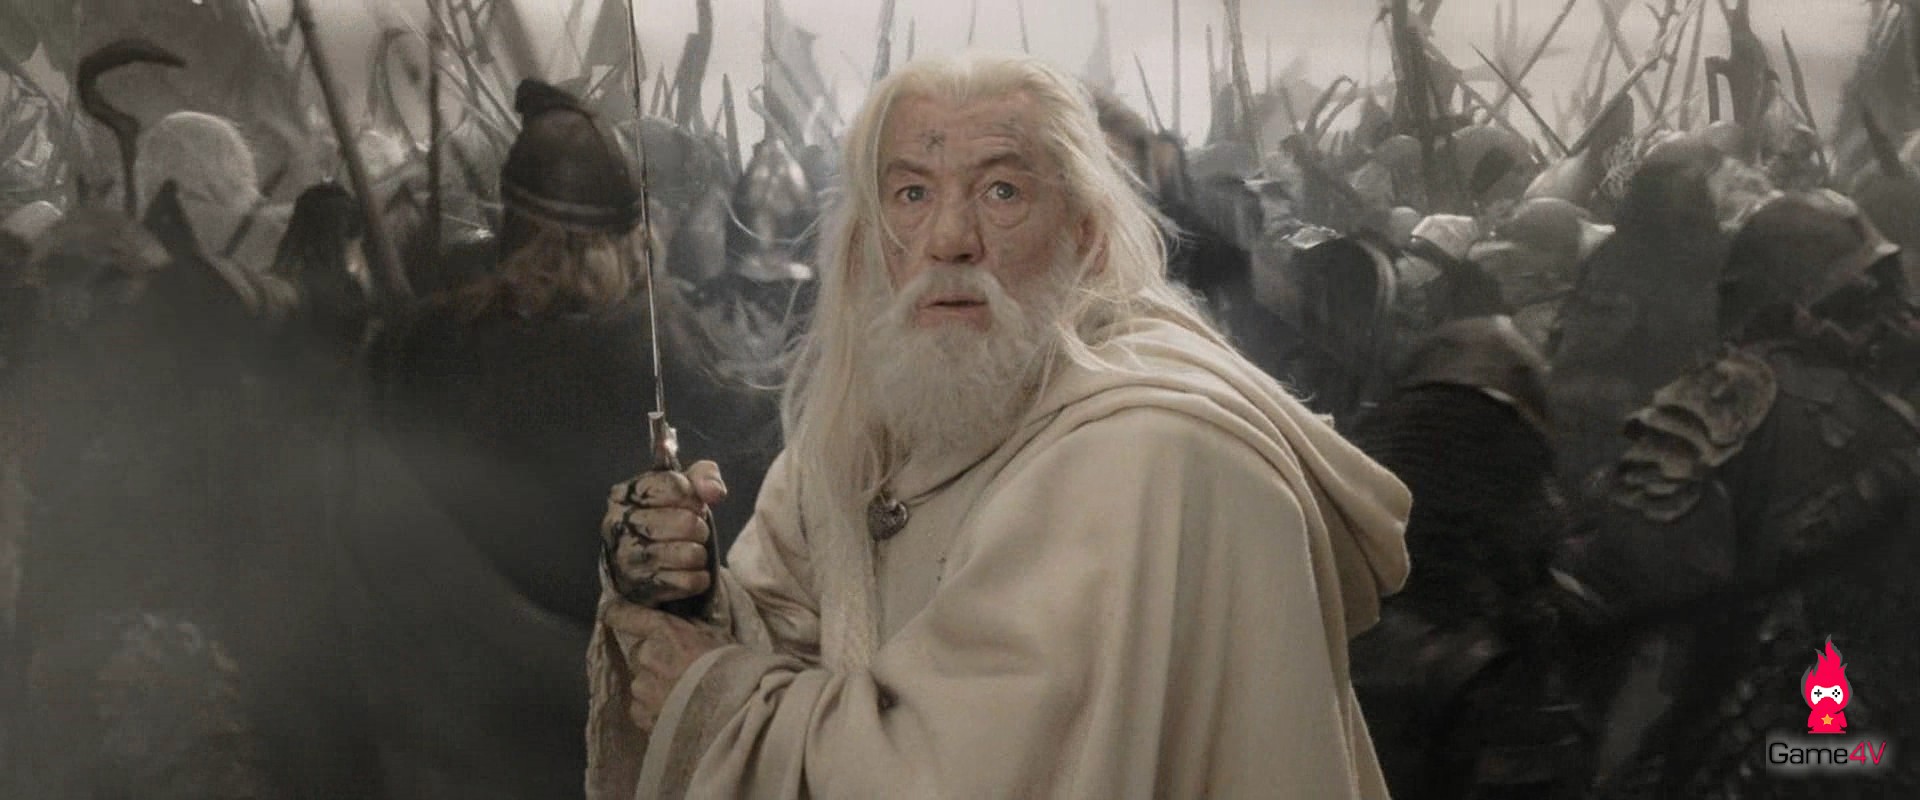 56114-the-lord-of-the-rings-the-return-of-the-king-gandalf-the-white